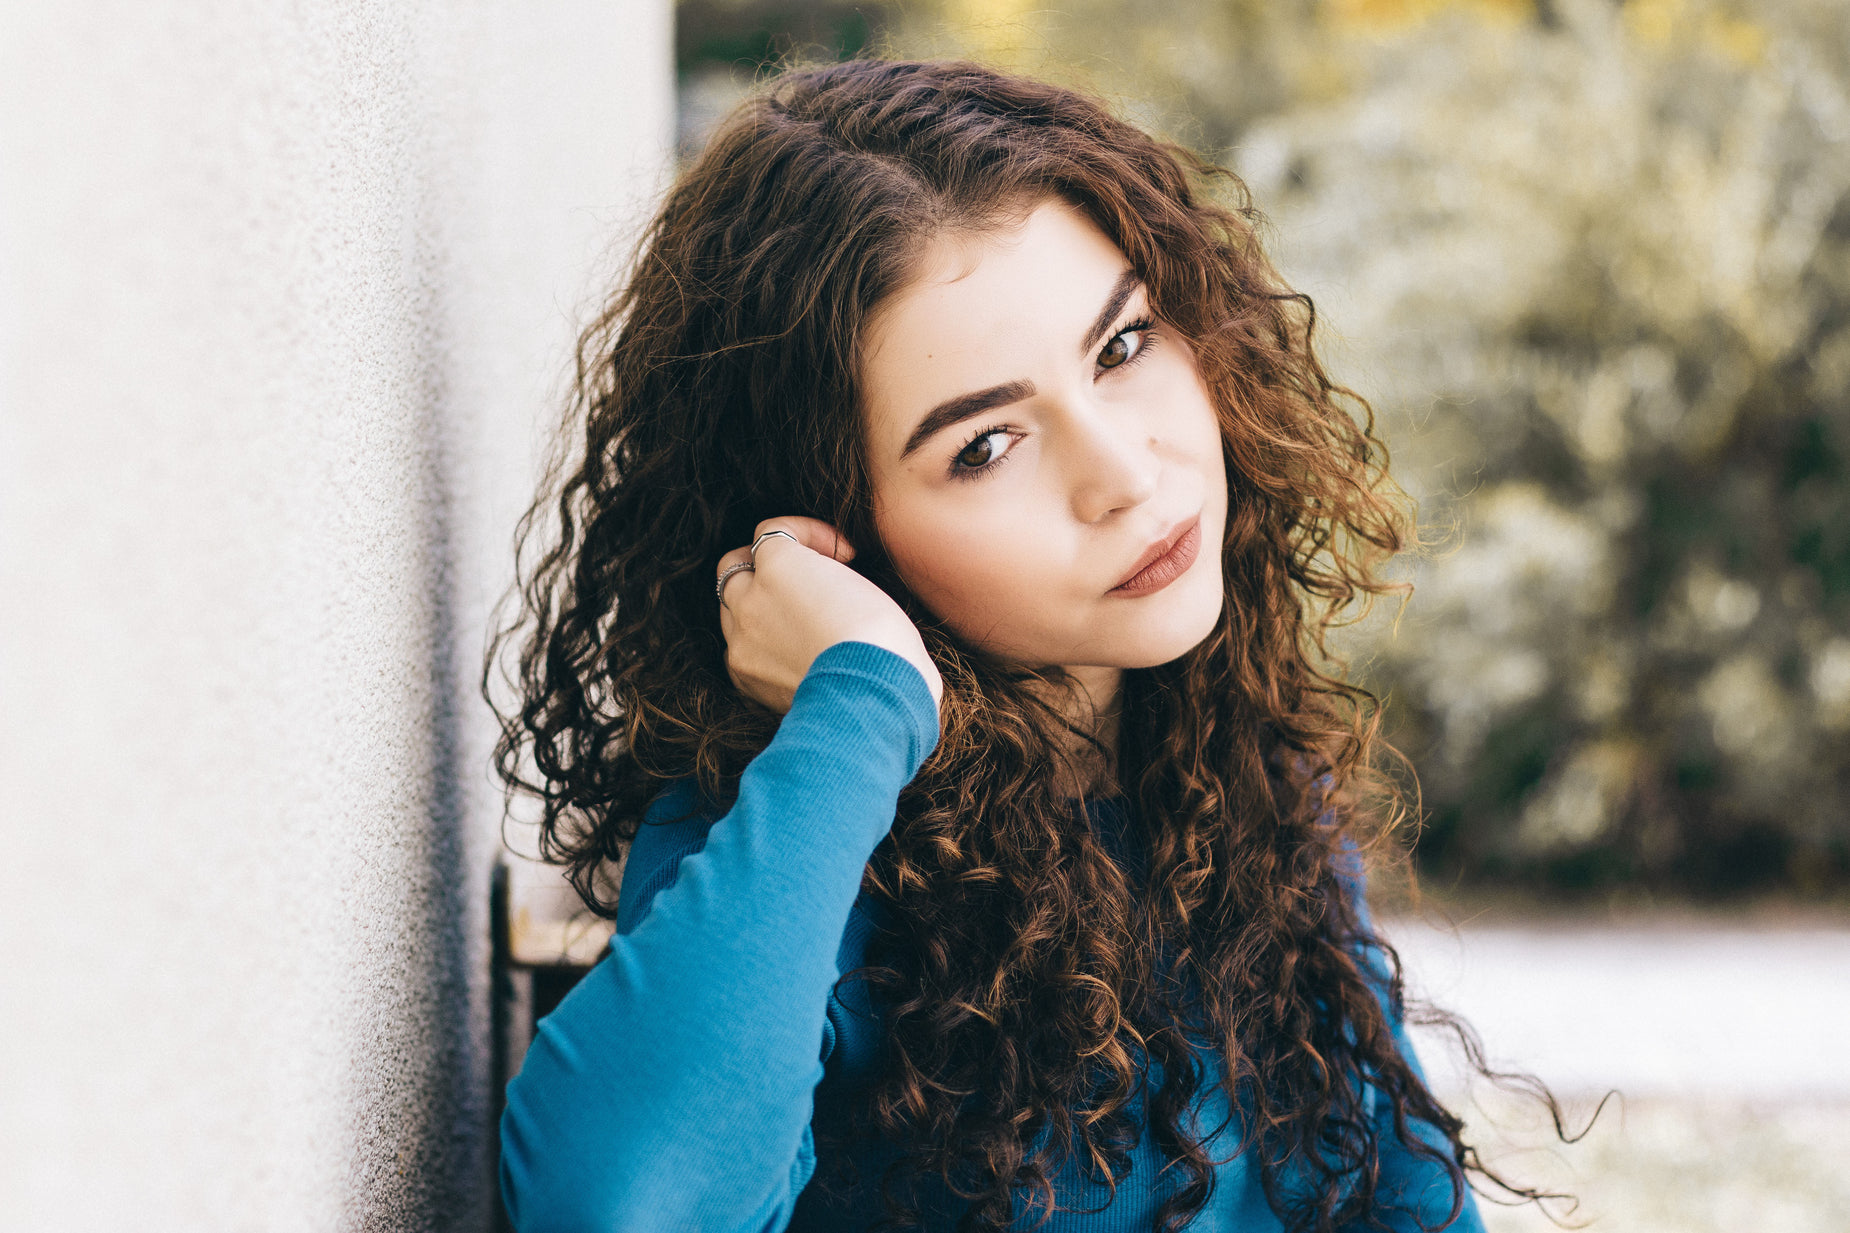 a girl with curly hair and blue shirt leaning against the wall